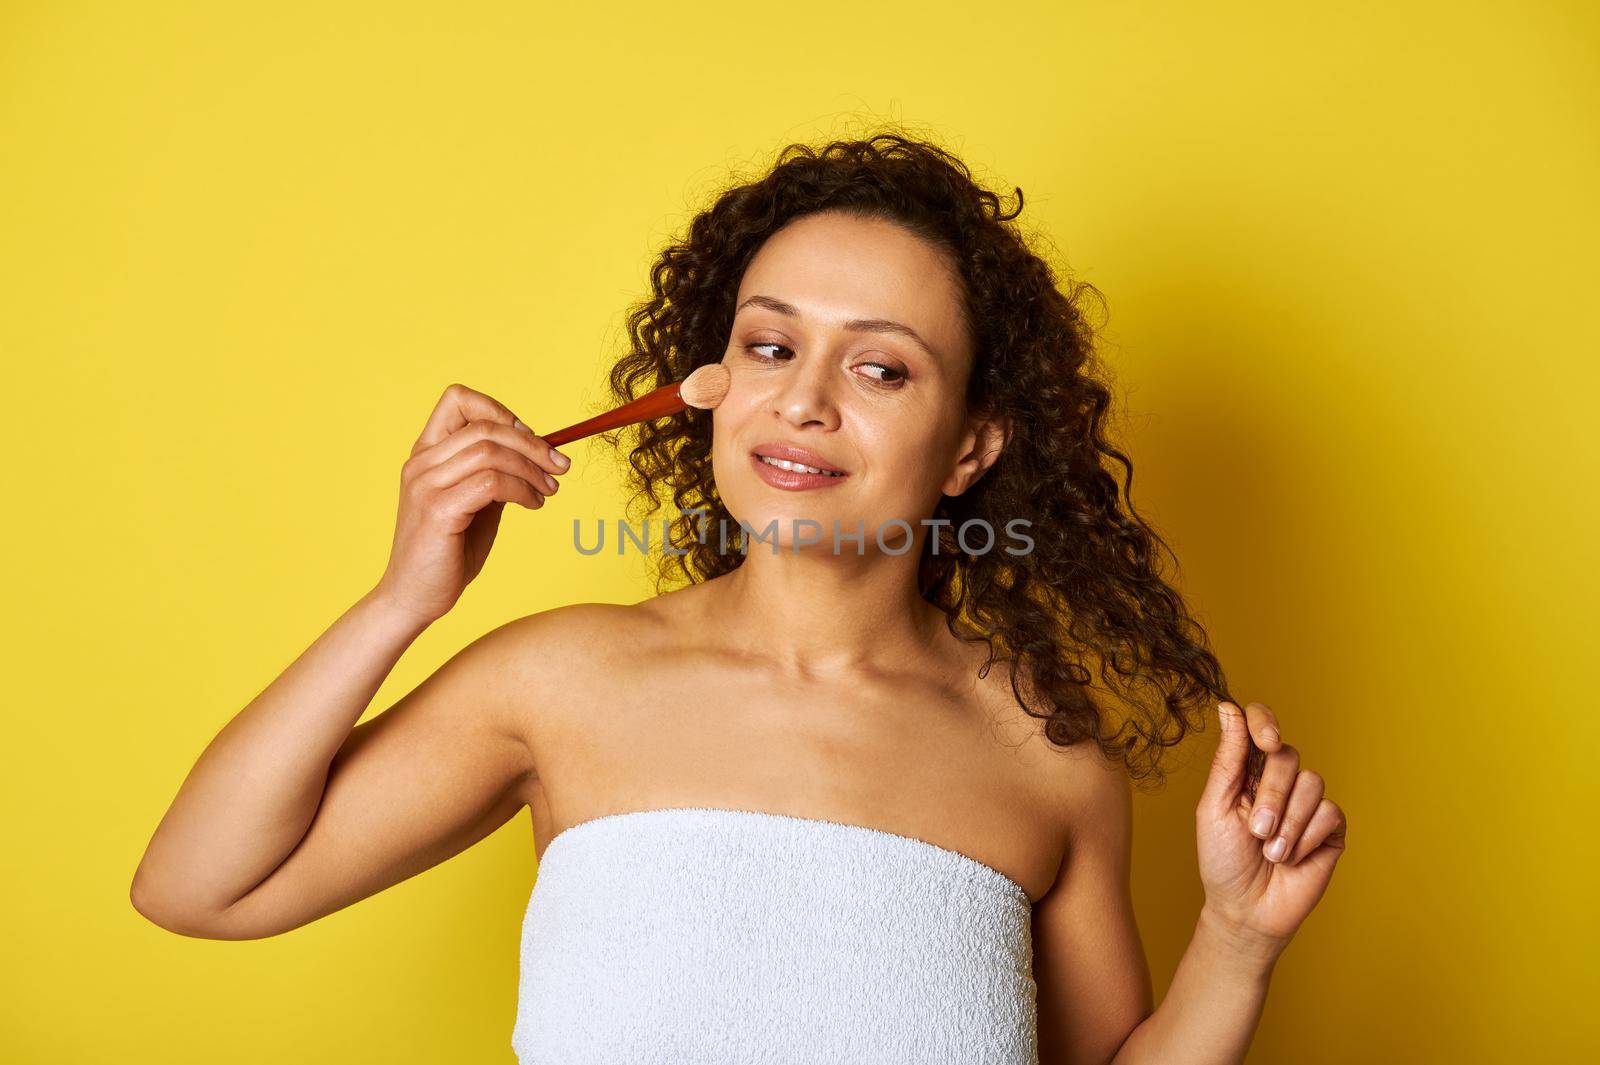 Charming half naked mulatto woman holding a makeup brush and applying blush on her face. Isolated beauty concepts on yellow background with copy space by artgf